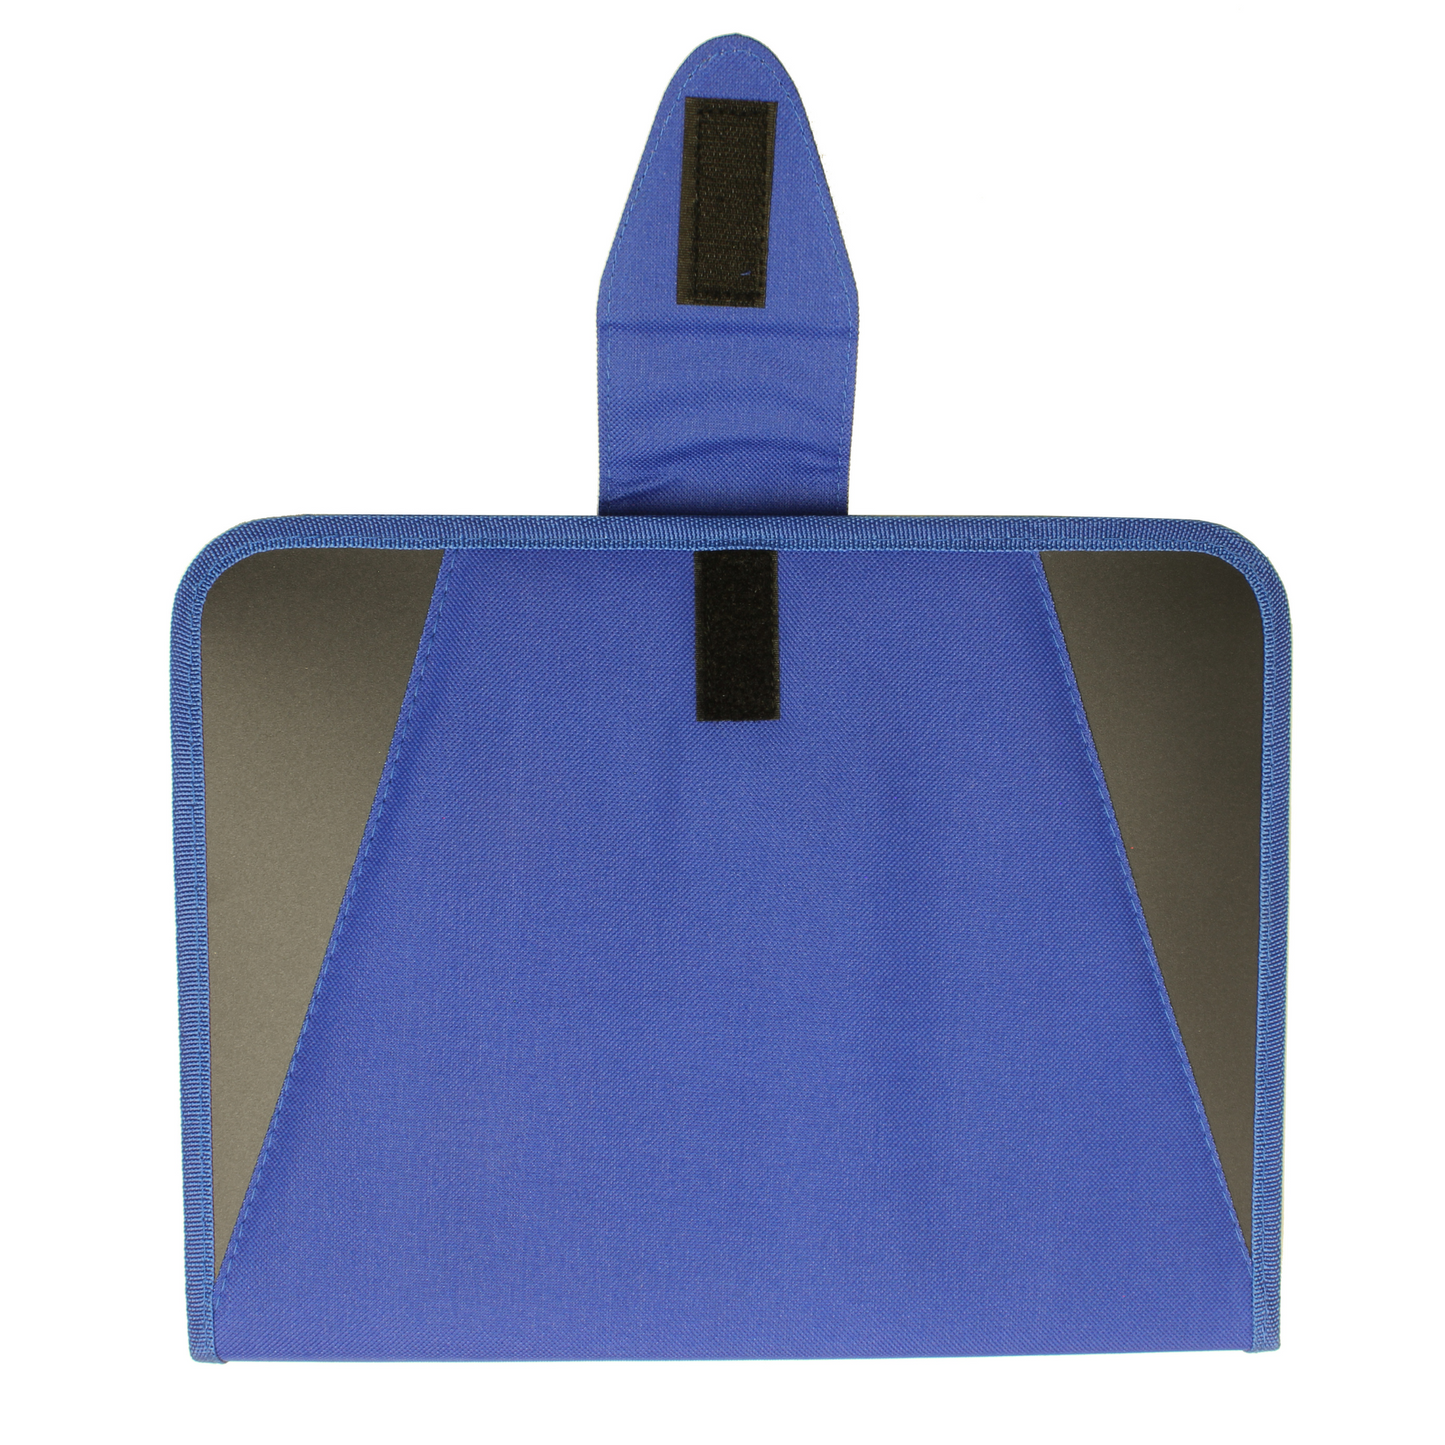 A vibrant blue fabric document folder, with velcro fastener opened flat. The folder features a Velcro fastener tab for secure closure. The edges are reinforced with blue trim, and the overall design is simple yet functional, suitable for organizing and protecting documents.